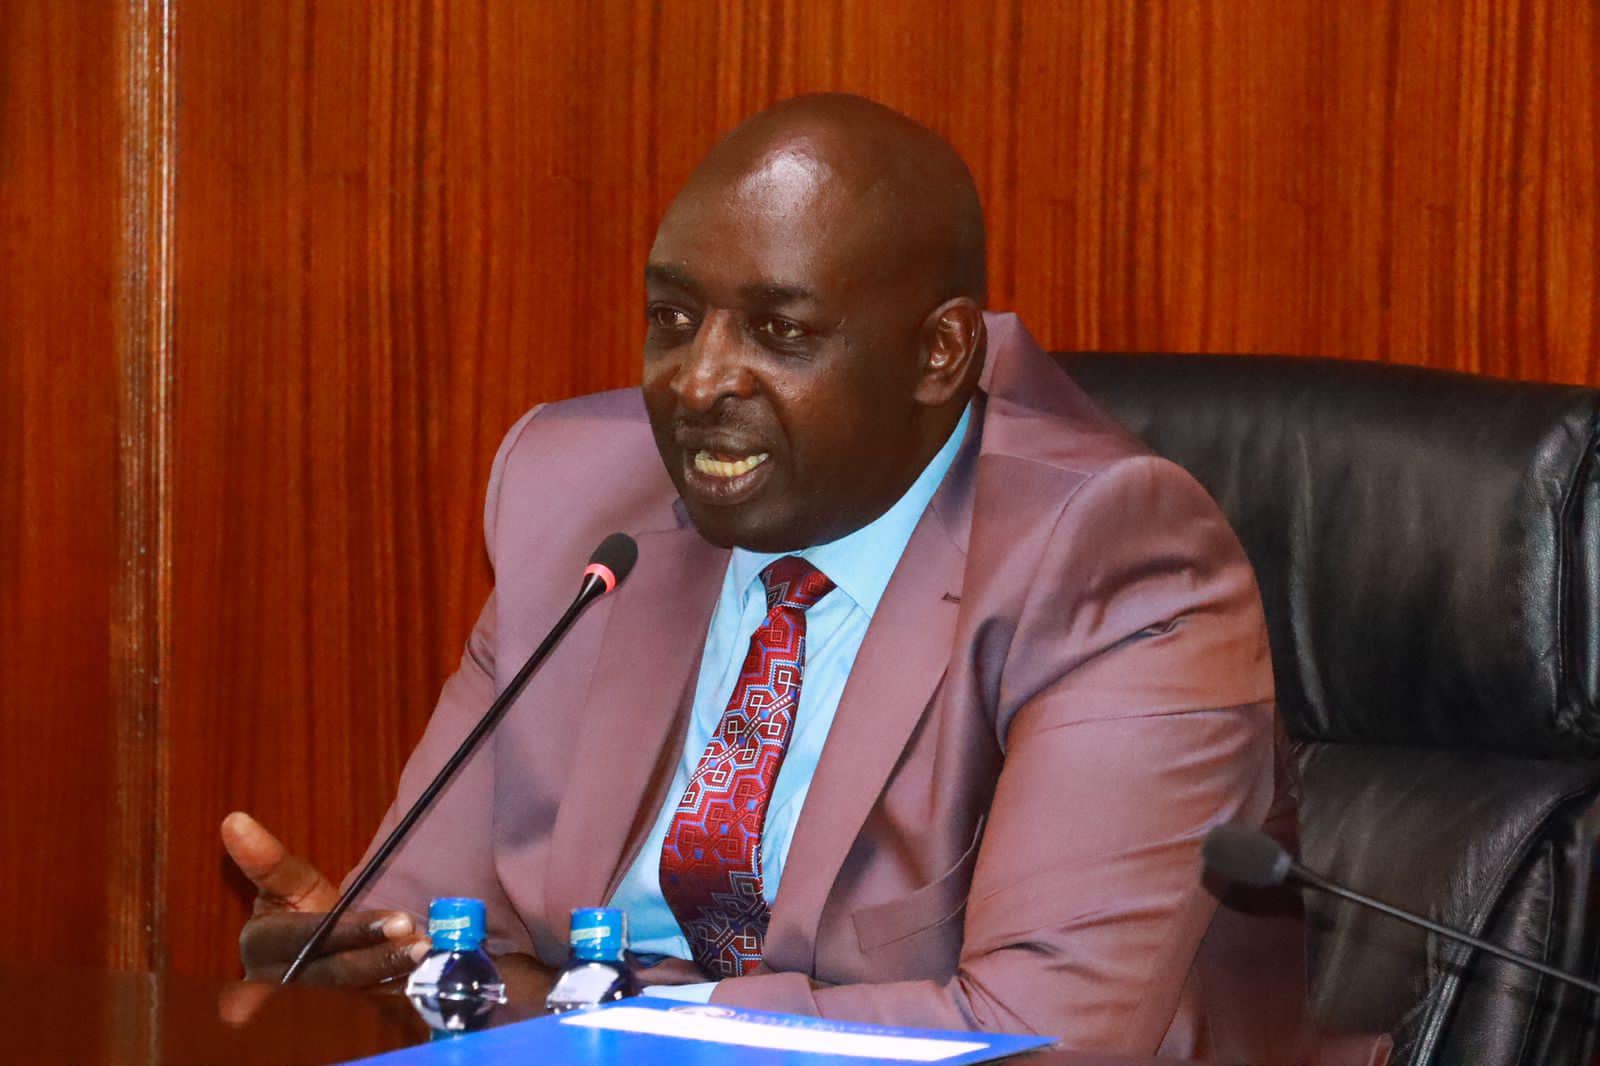 Embakasi North MP James Gakuya is the Chairperson of the Trade Committee that is carrying out the sugar investigation